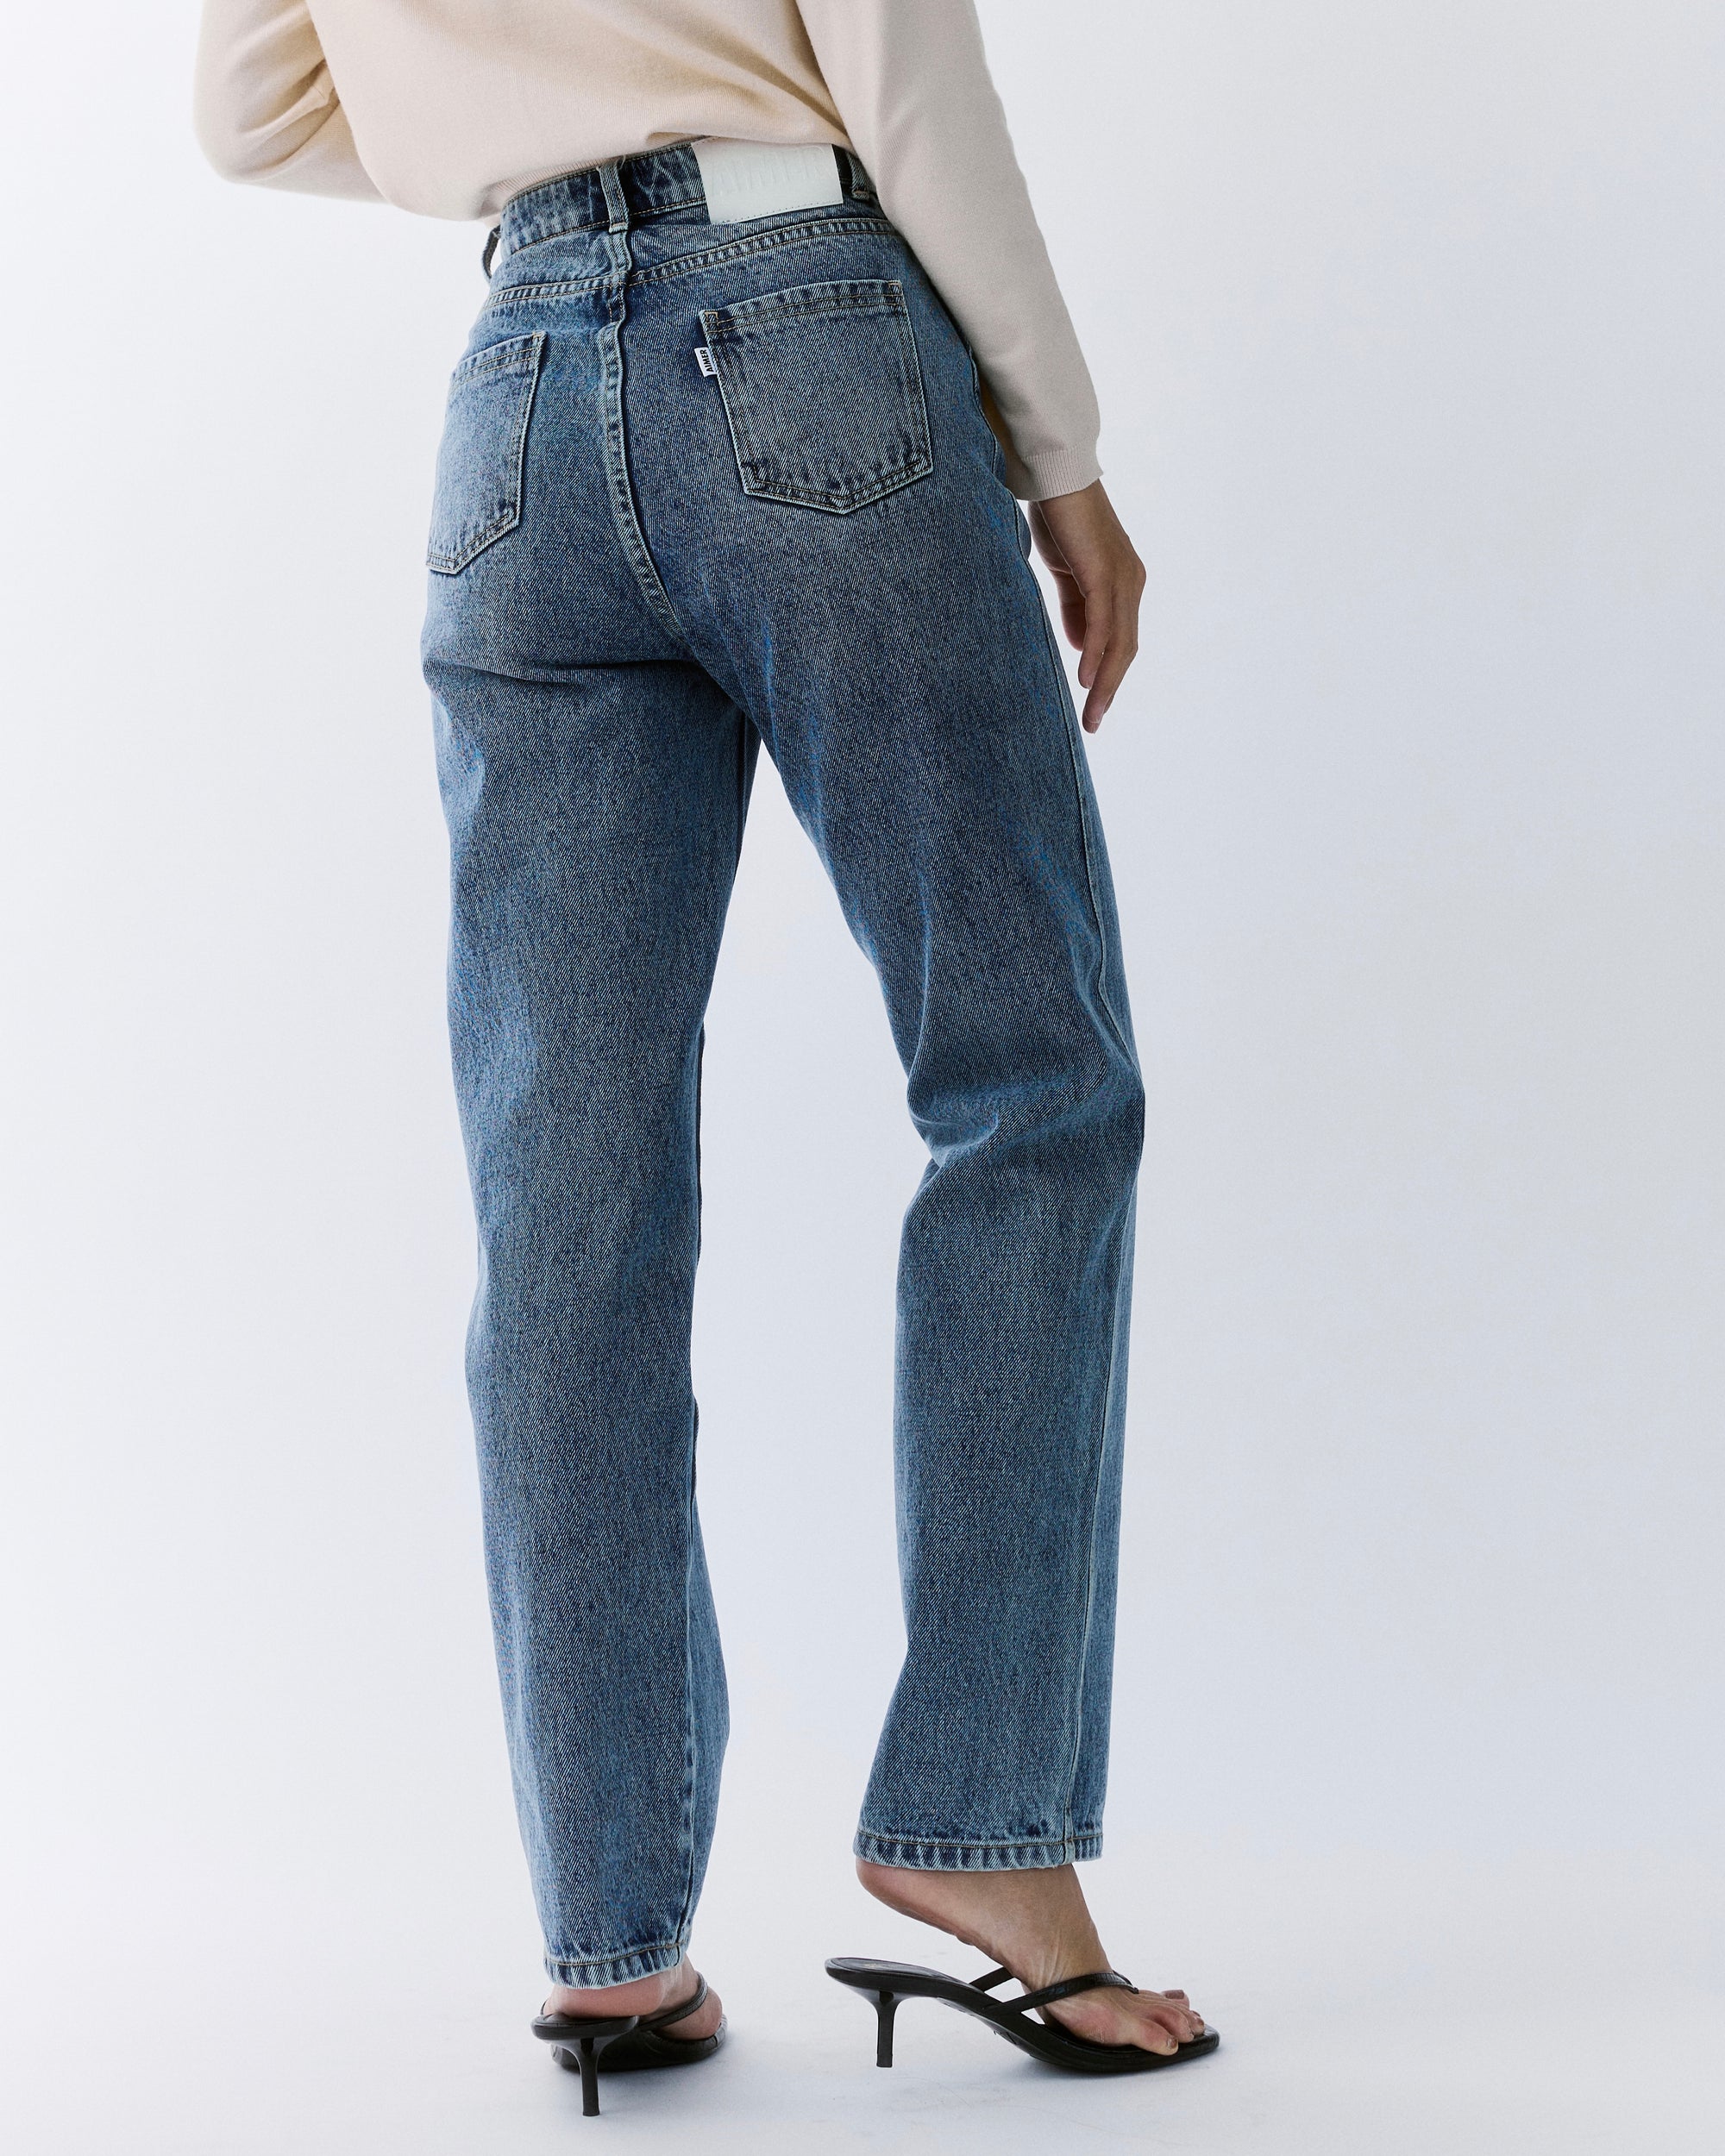 90s High Rise Jeans